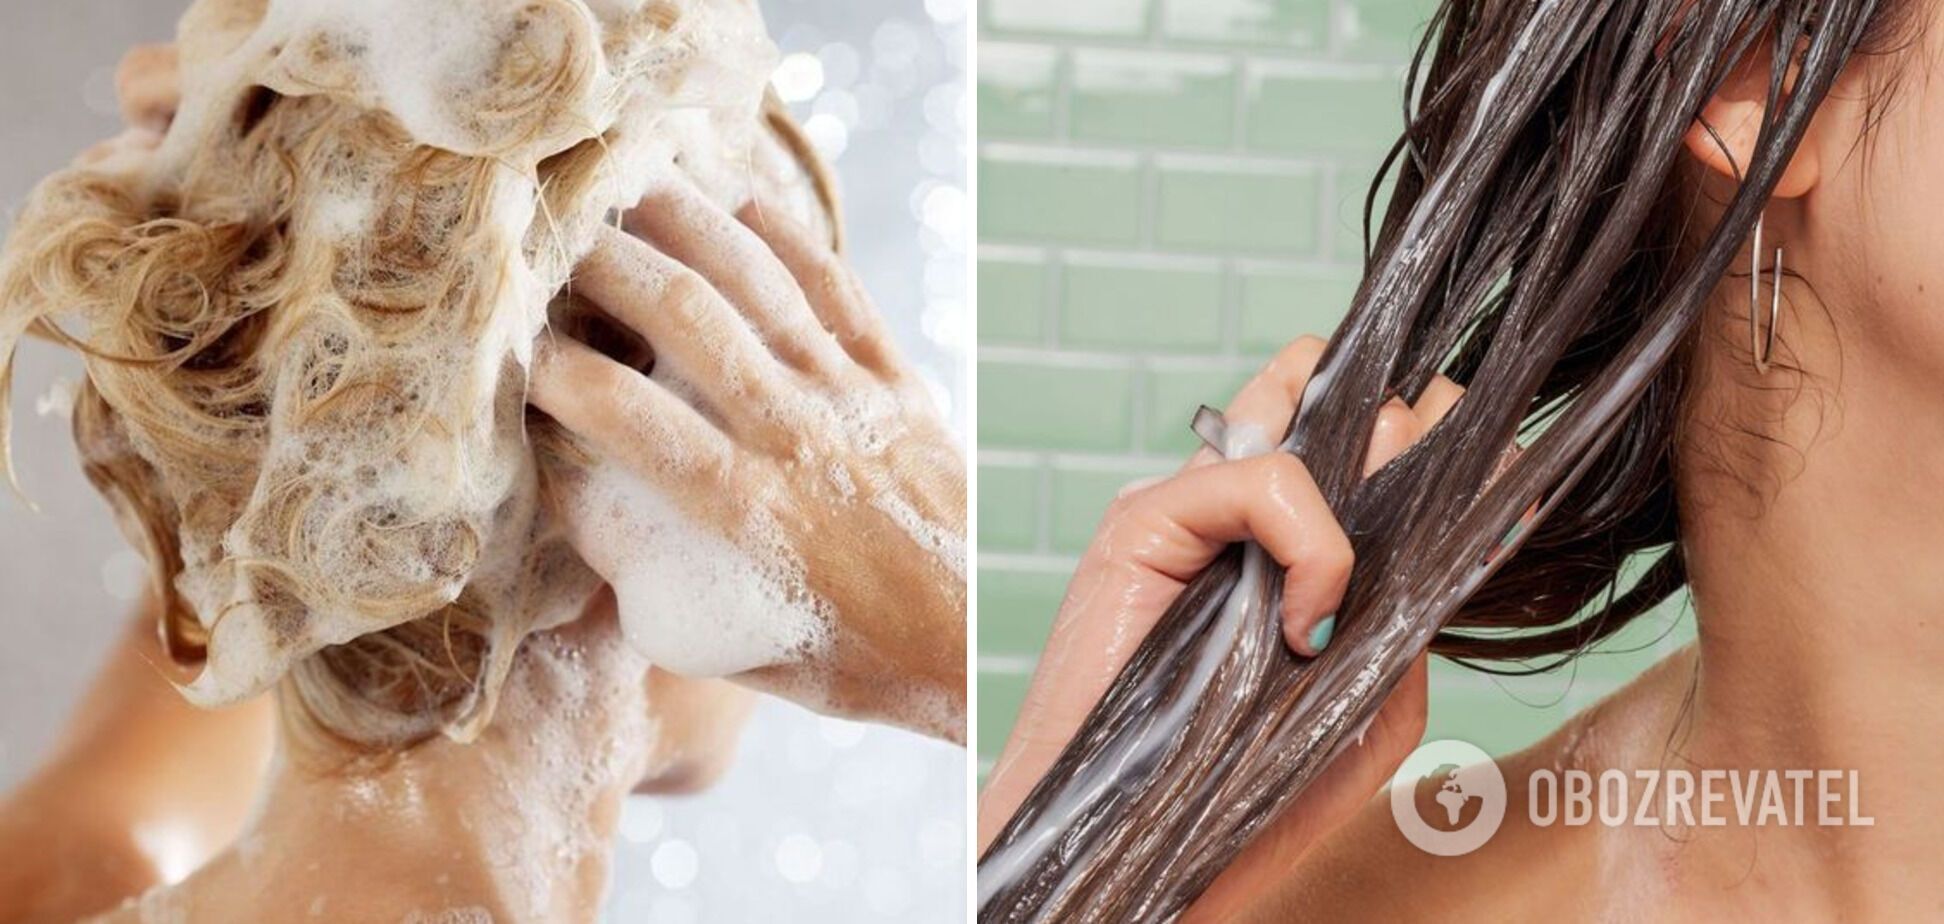 5 secrets for straighting hair to make you look like you've just visited a beauty salon